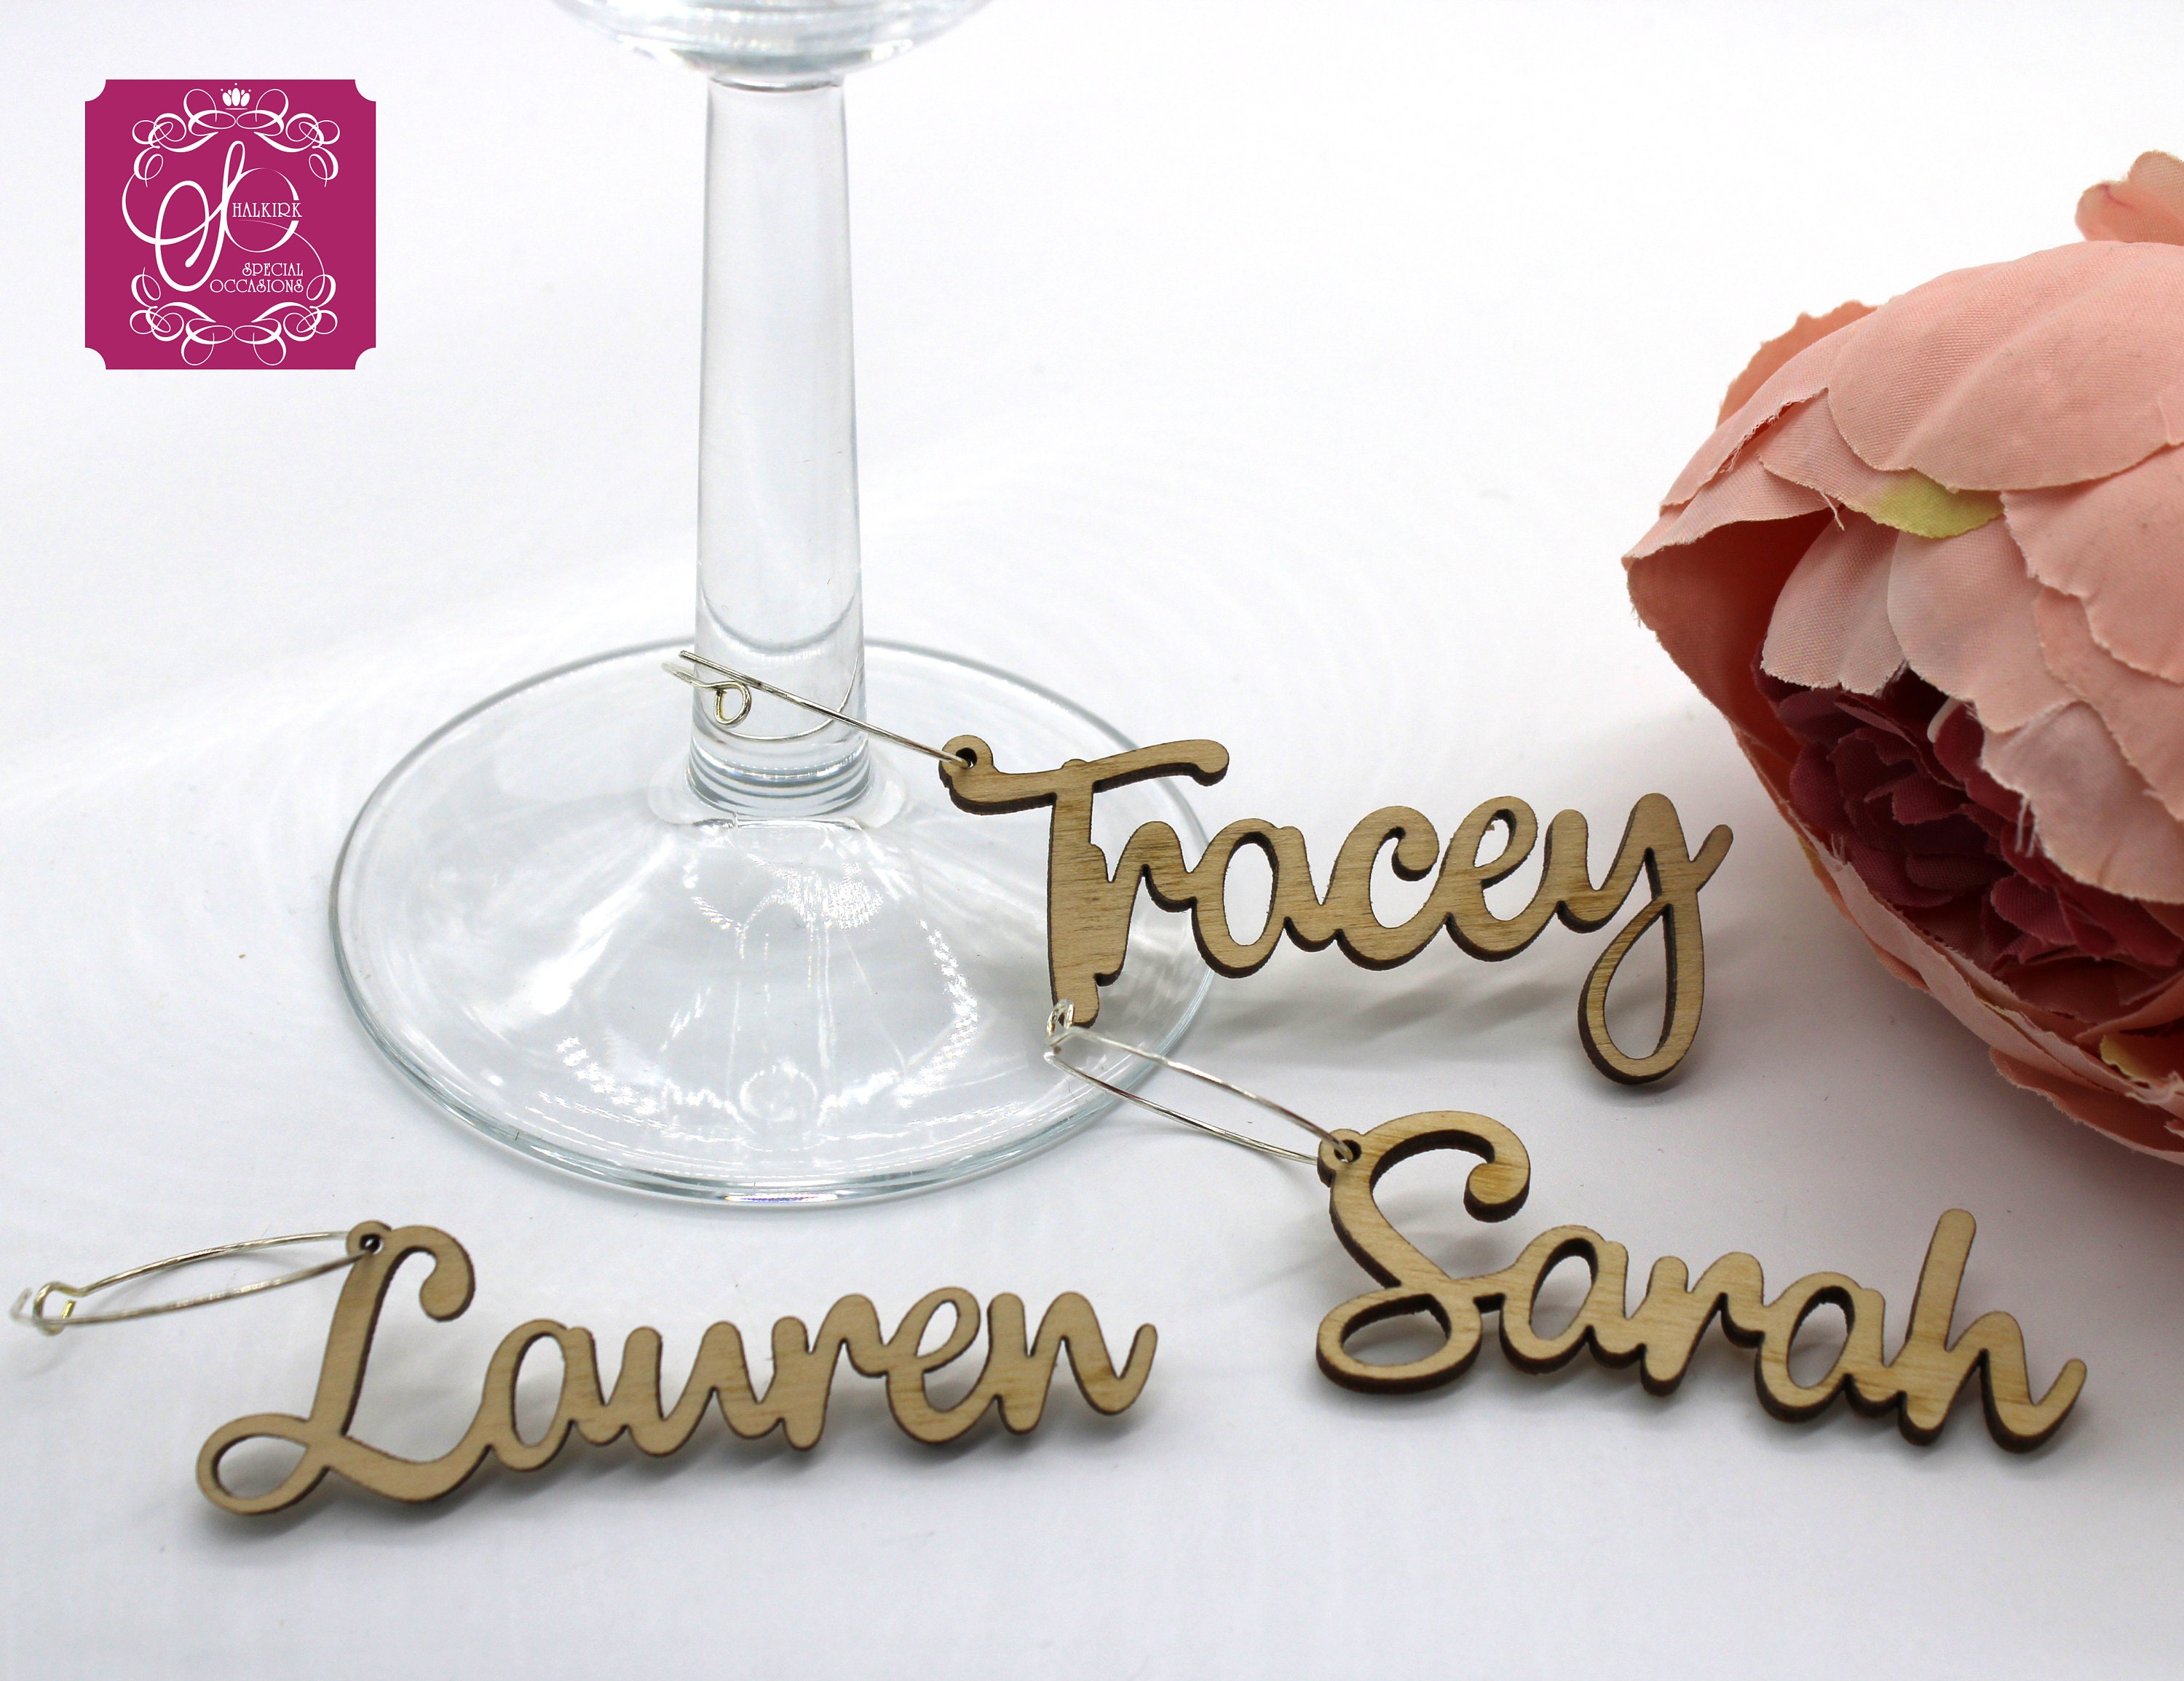 Personalized Wine Glass Charms Custom Name Tags Hen Party Cocktail Bar  Champagne Birthday Drink Markers Laser Cut Place Cards Name Settings 